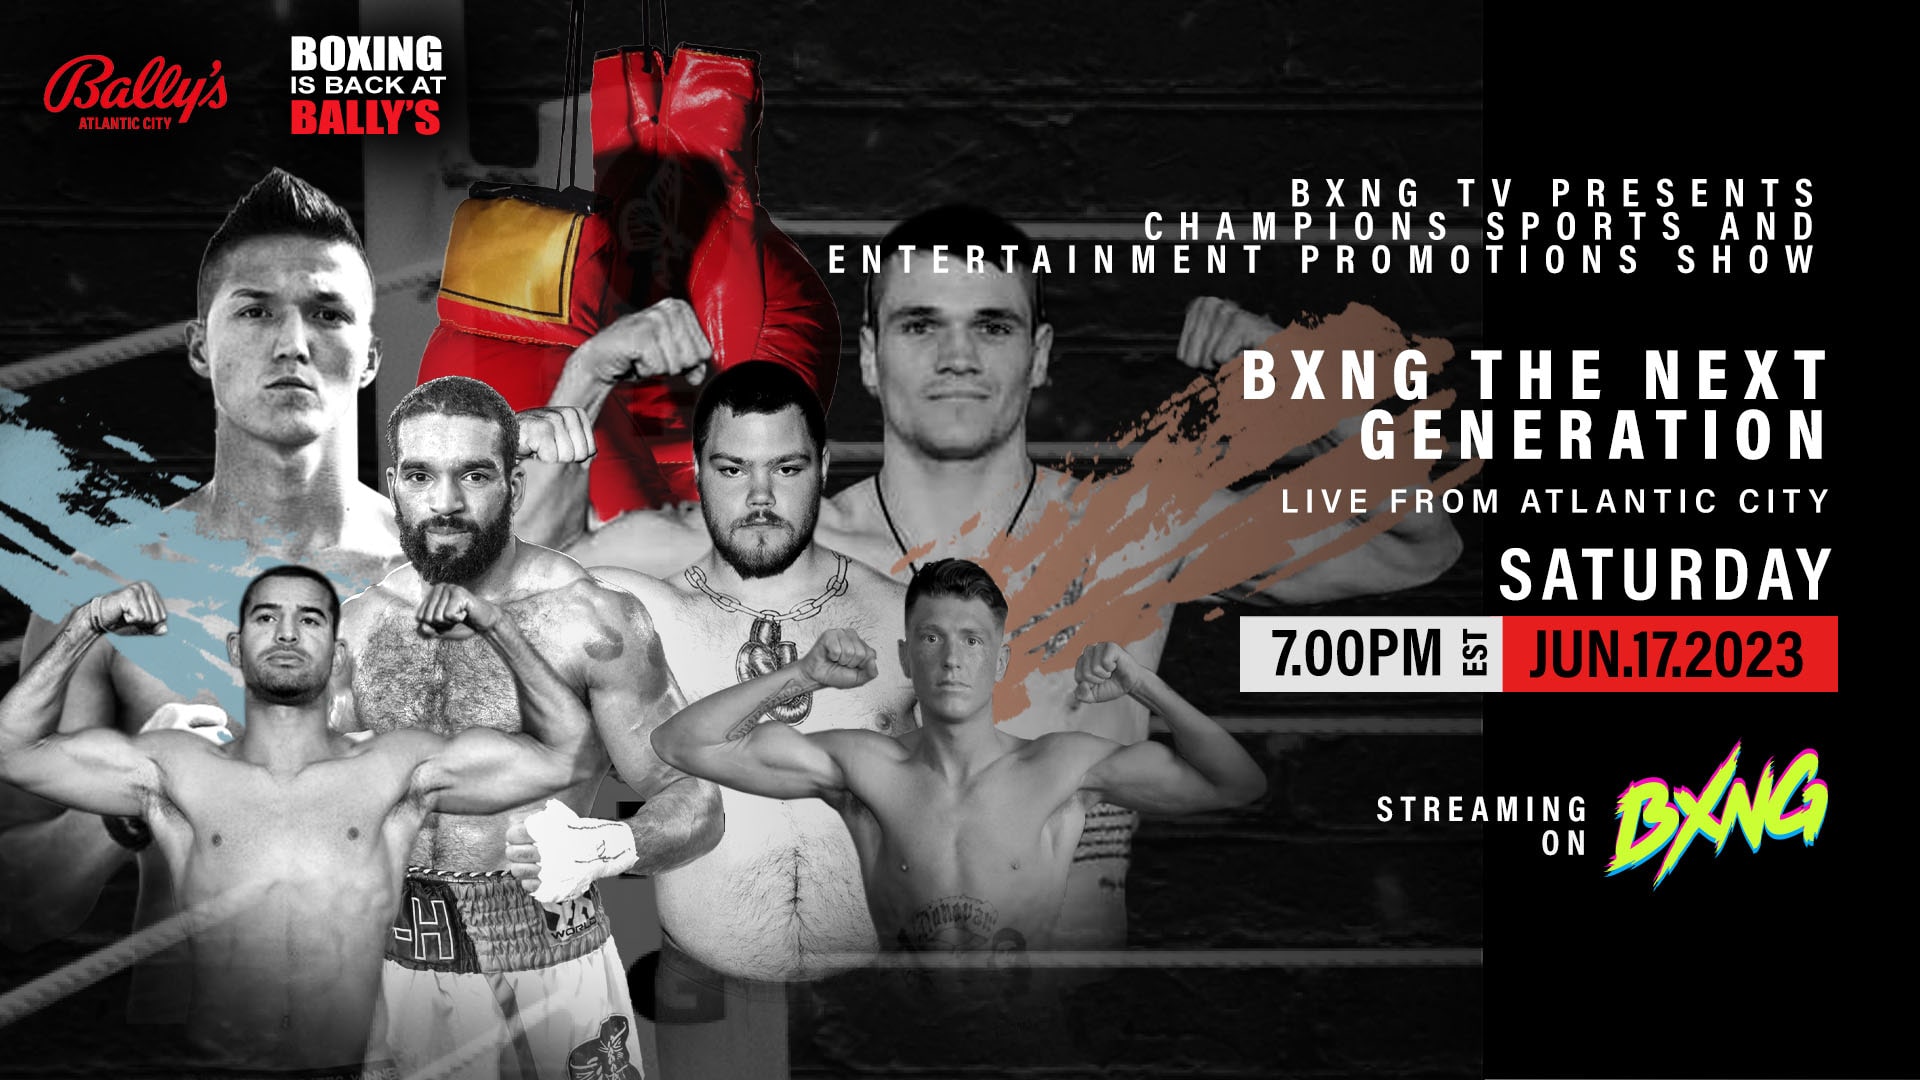 BXNG TV Presents Champions Sports and Entertainment Promotions Show Live Stream 06/17/23